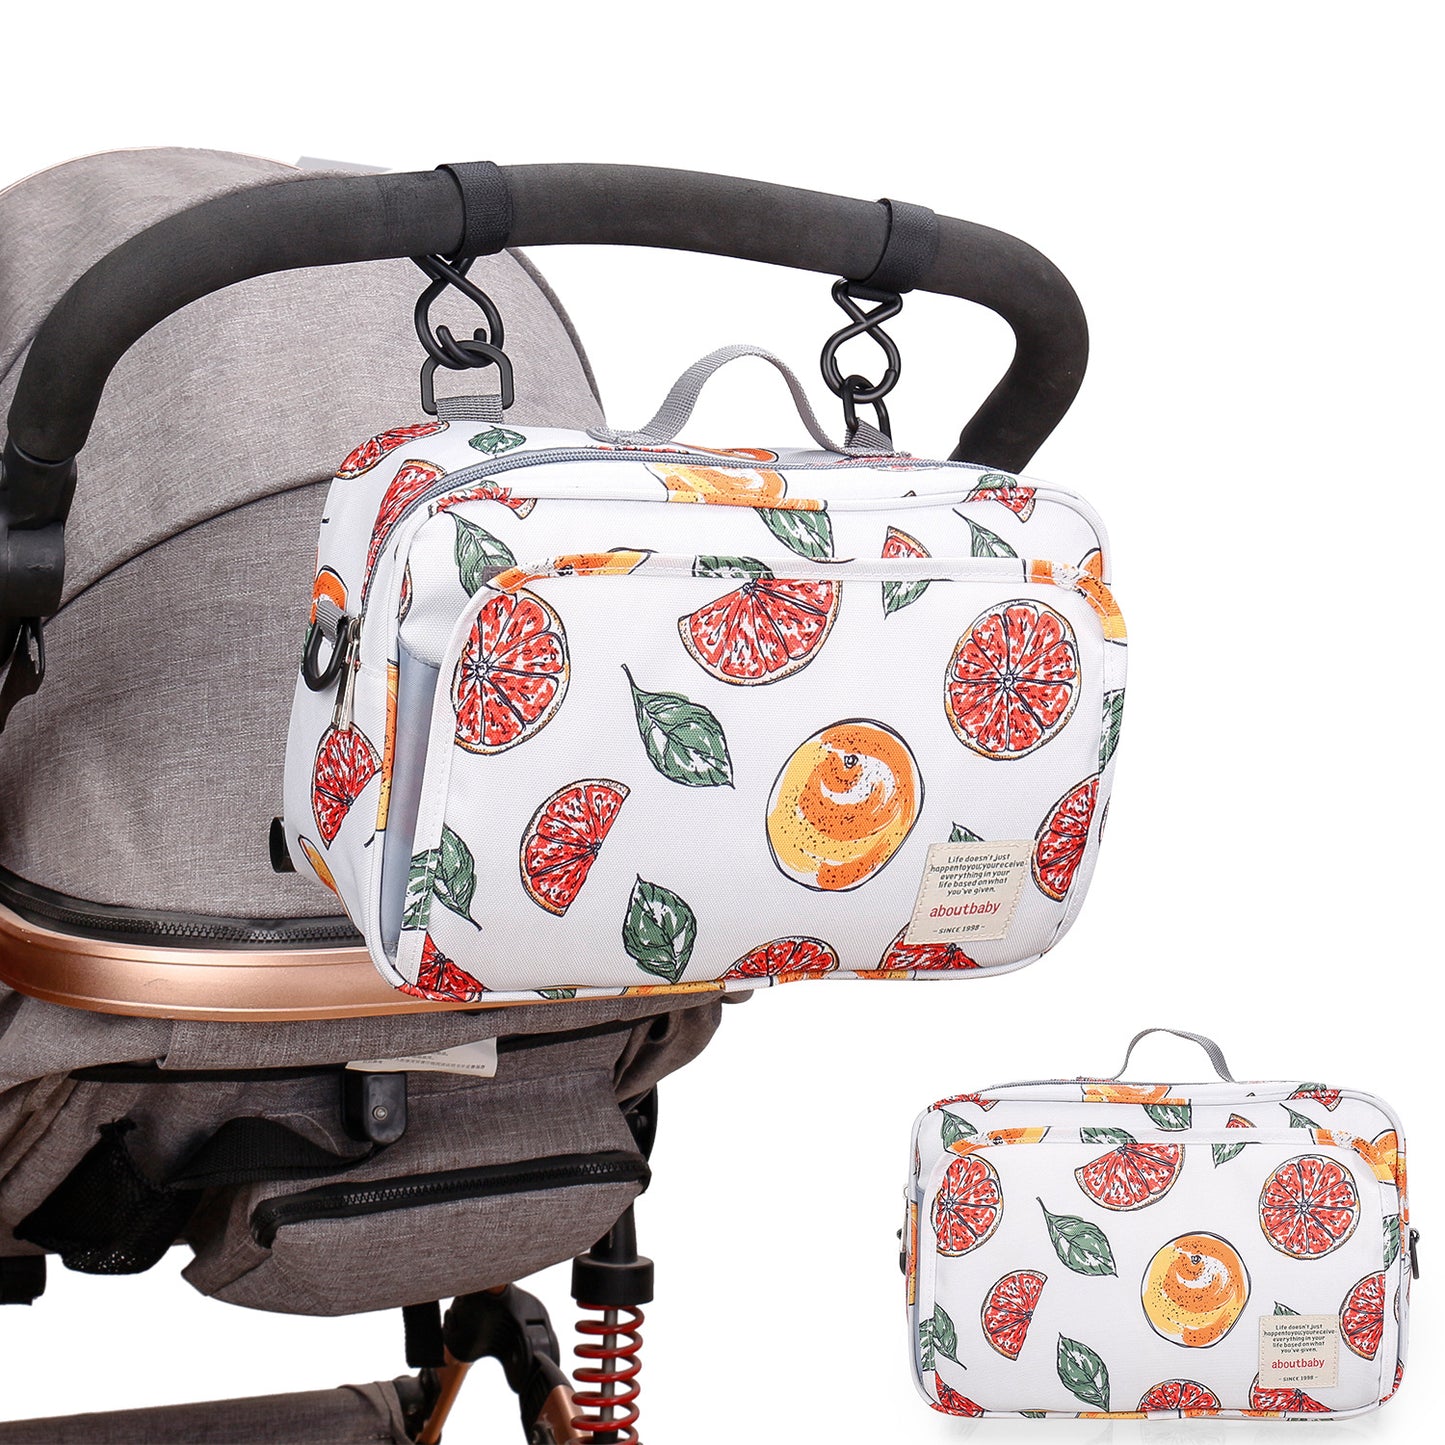 2 Ways Baby Diaper Bag Stroller Bag - Diaper Caddy Tote Baby Stroller Bag for Diapers Wipes Toys,Nappy Bags